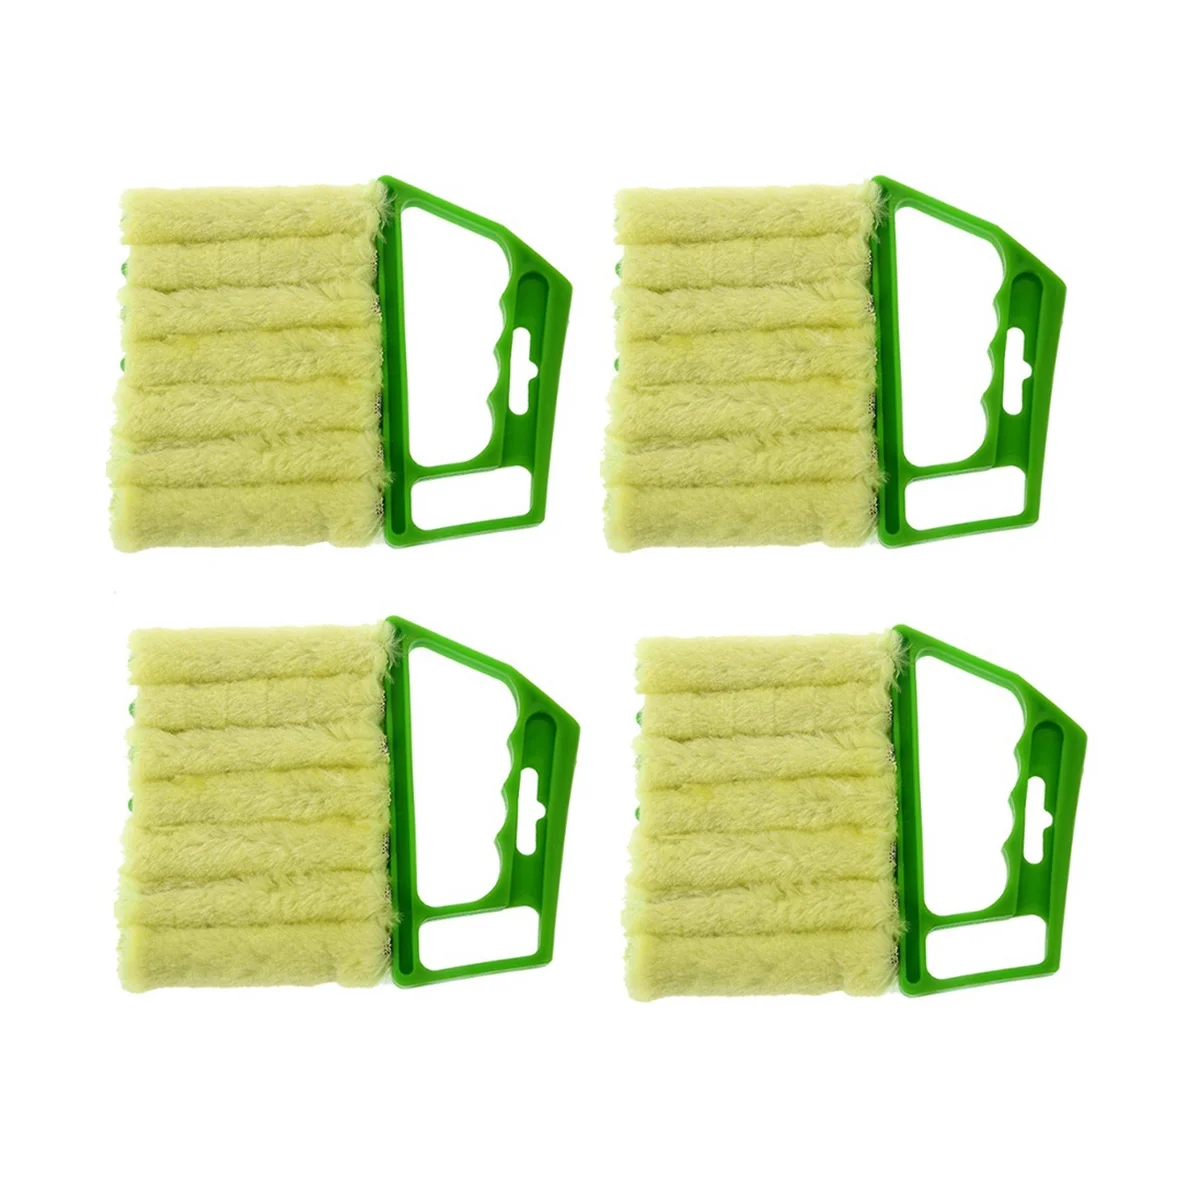 

4Pcs Handheld Blinds Cleaner Shutter Curtain Brush Dust Remover for Air Conditioning Home /Car Vents/Fan/Shutters-Green